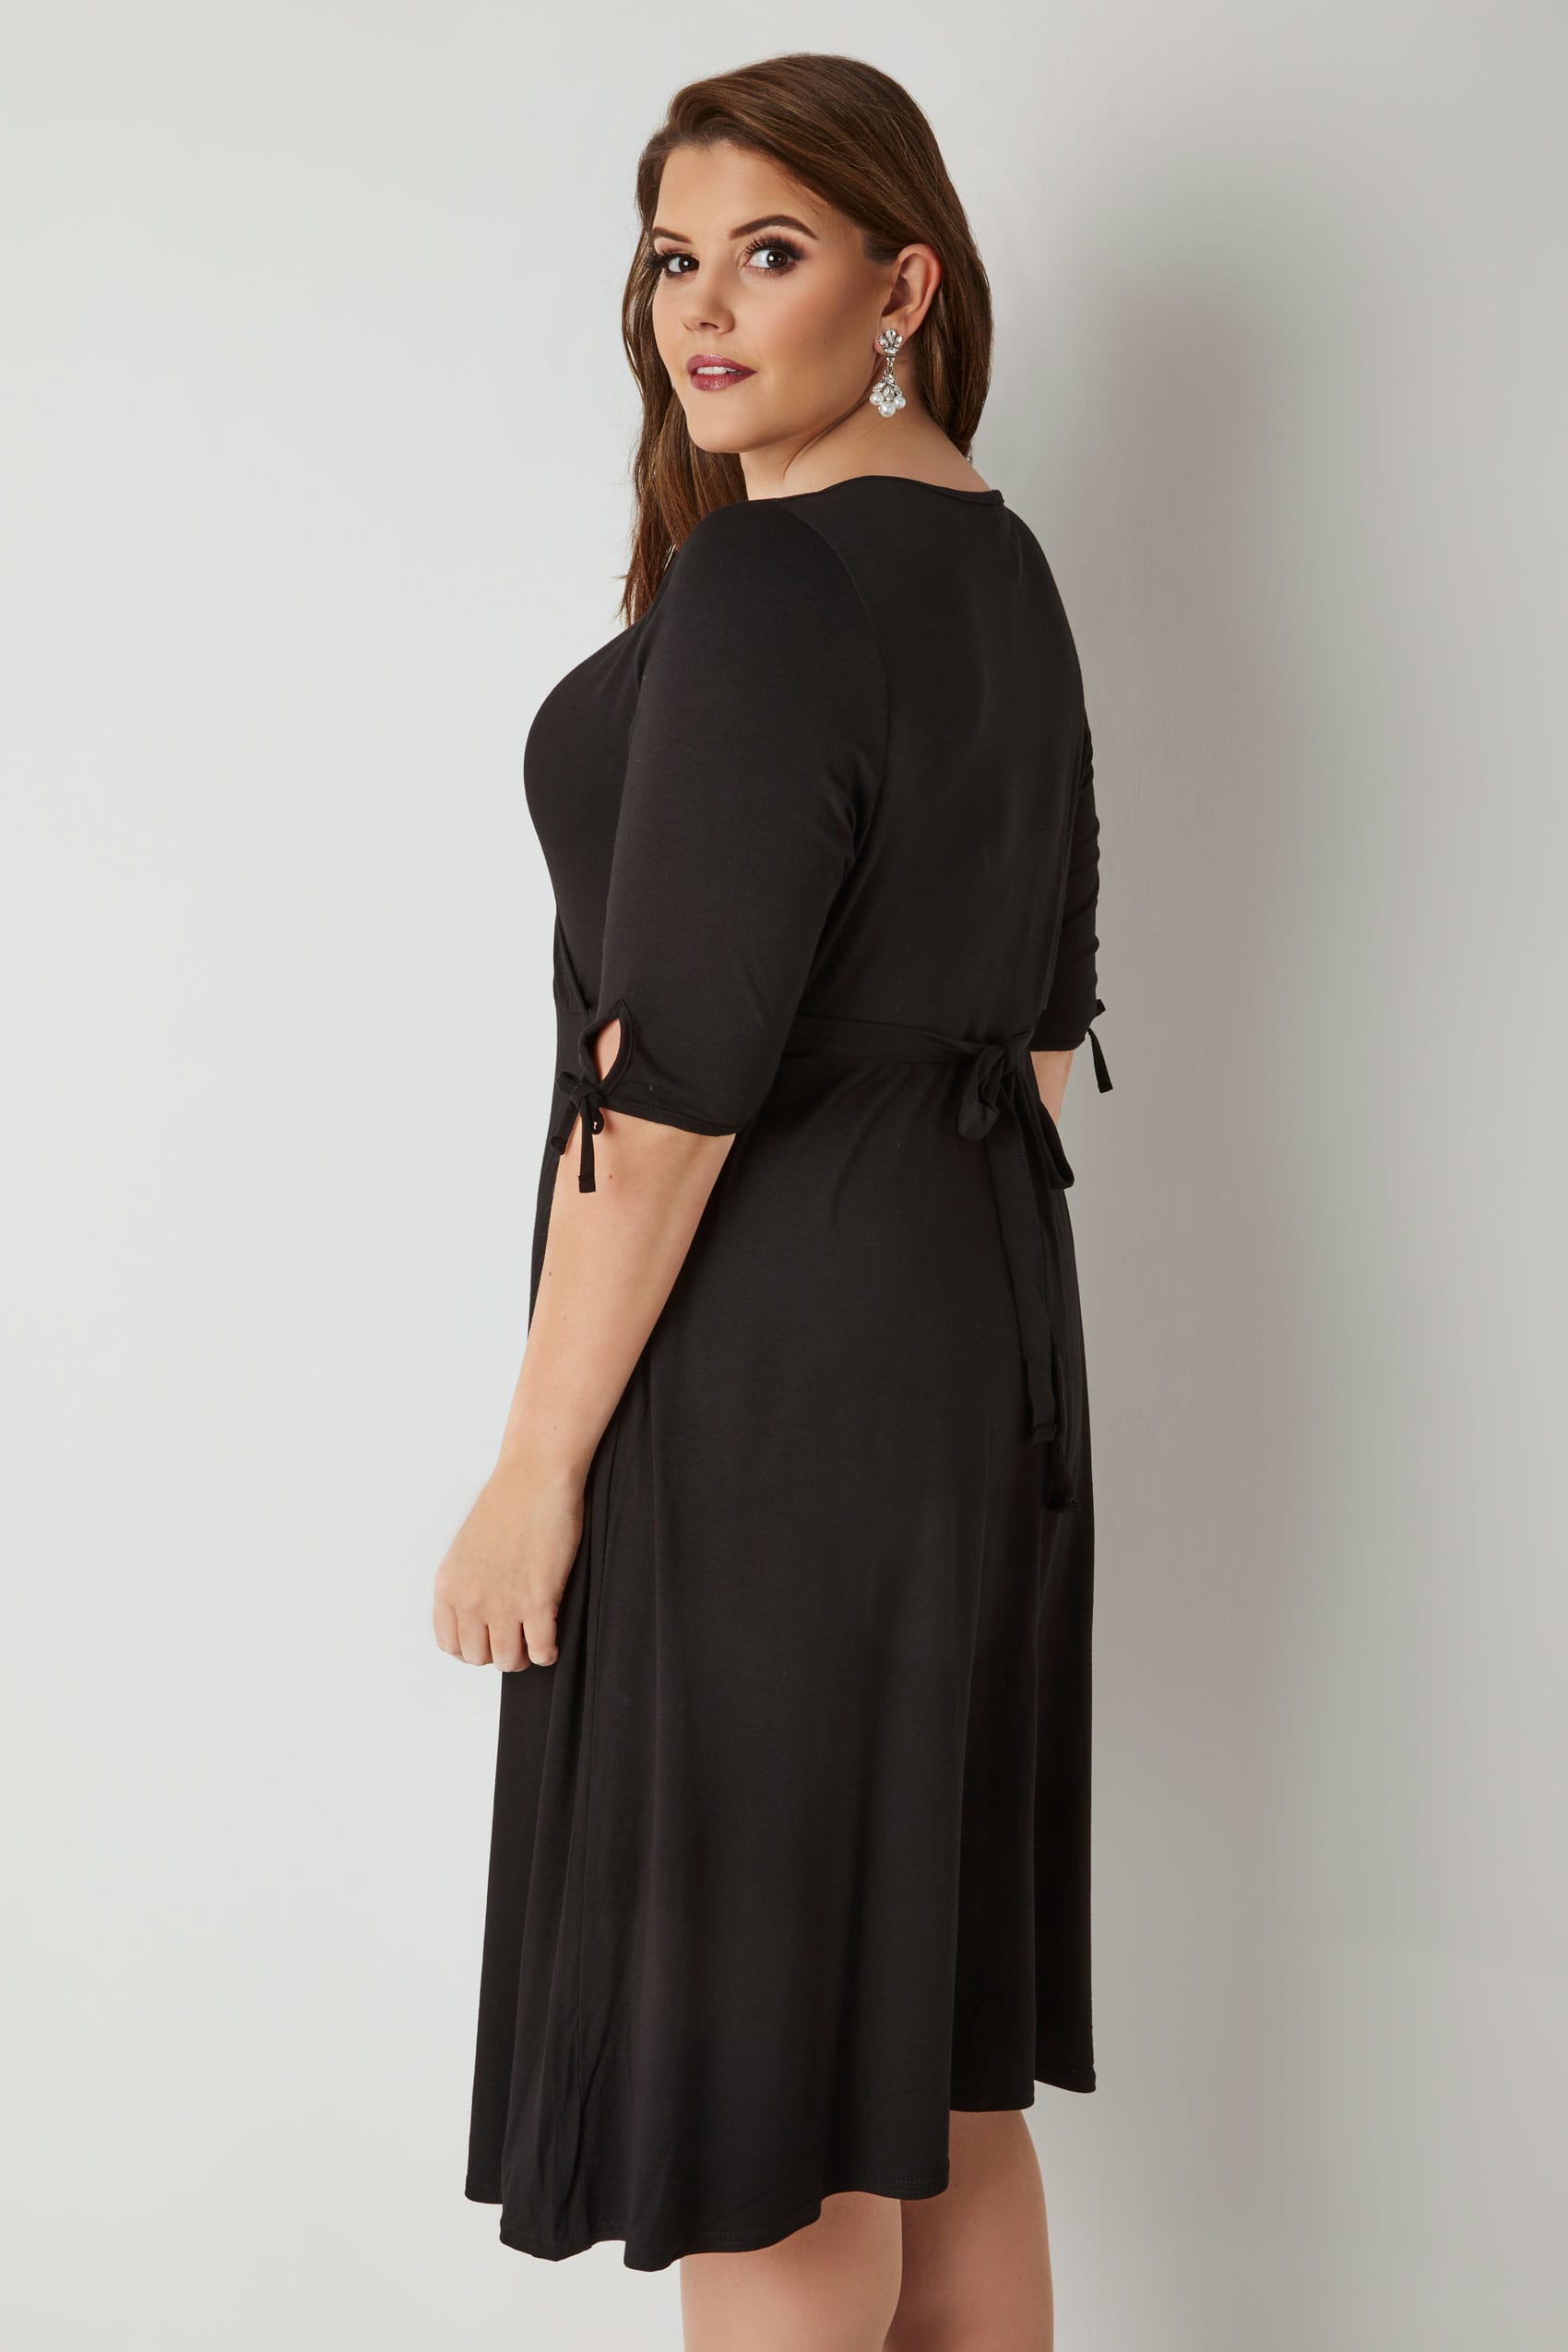 Yours London Black Wrap Dress With Tie Sleeves Plus Size 16 To 32